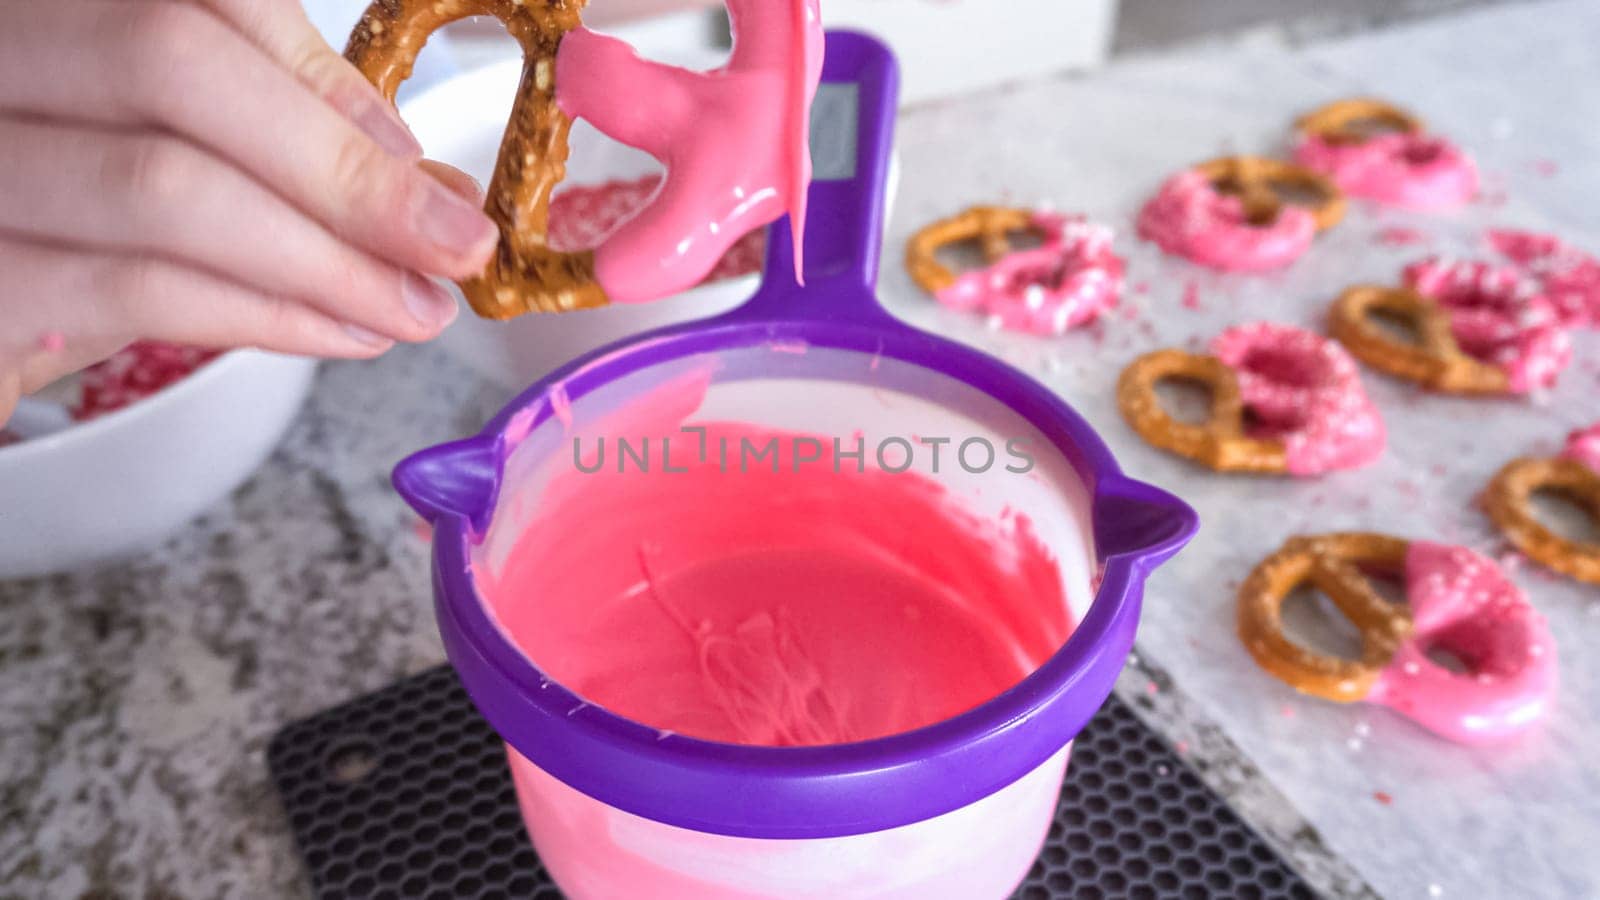 Freshly dipped and still glistening, these crunchy pretzels are lovingly adorned with pink chocolate and a scattering of colorful sprinkles, promising a feast for the senses.